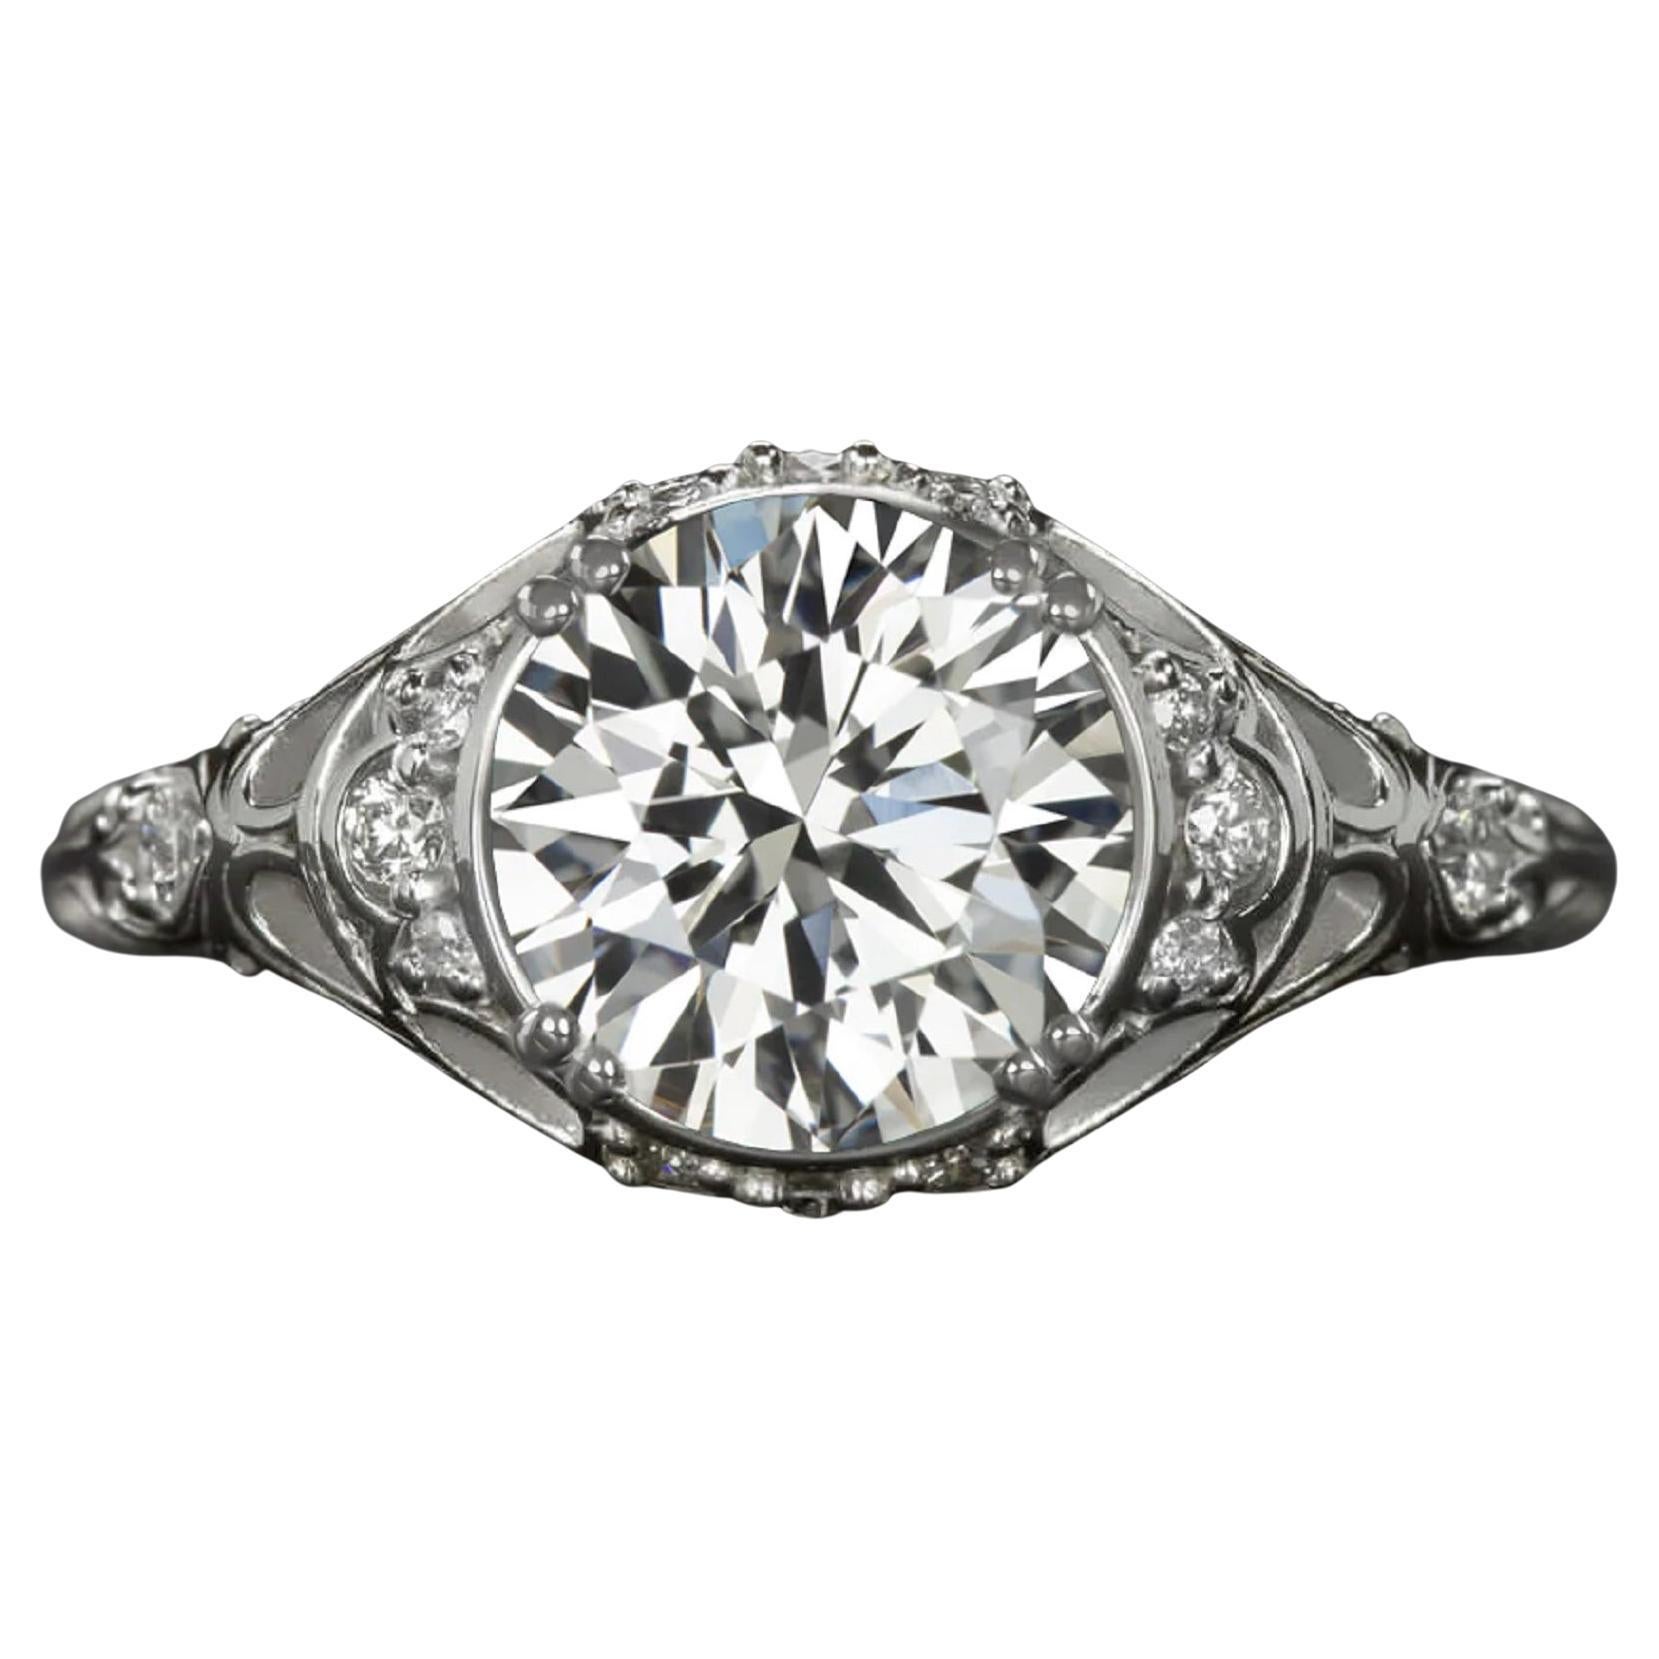 Vintage Style Diamond Ring is Impressive in Size with a Gorgeously Detailed For Sale